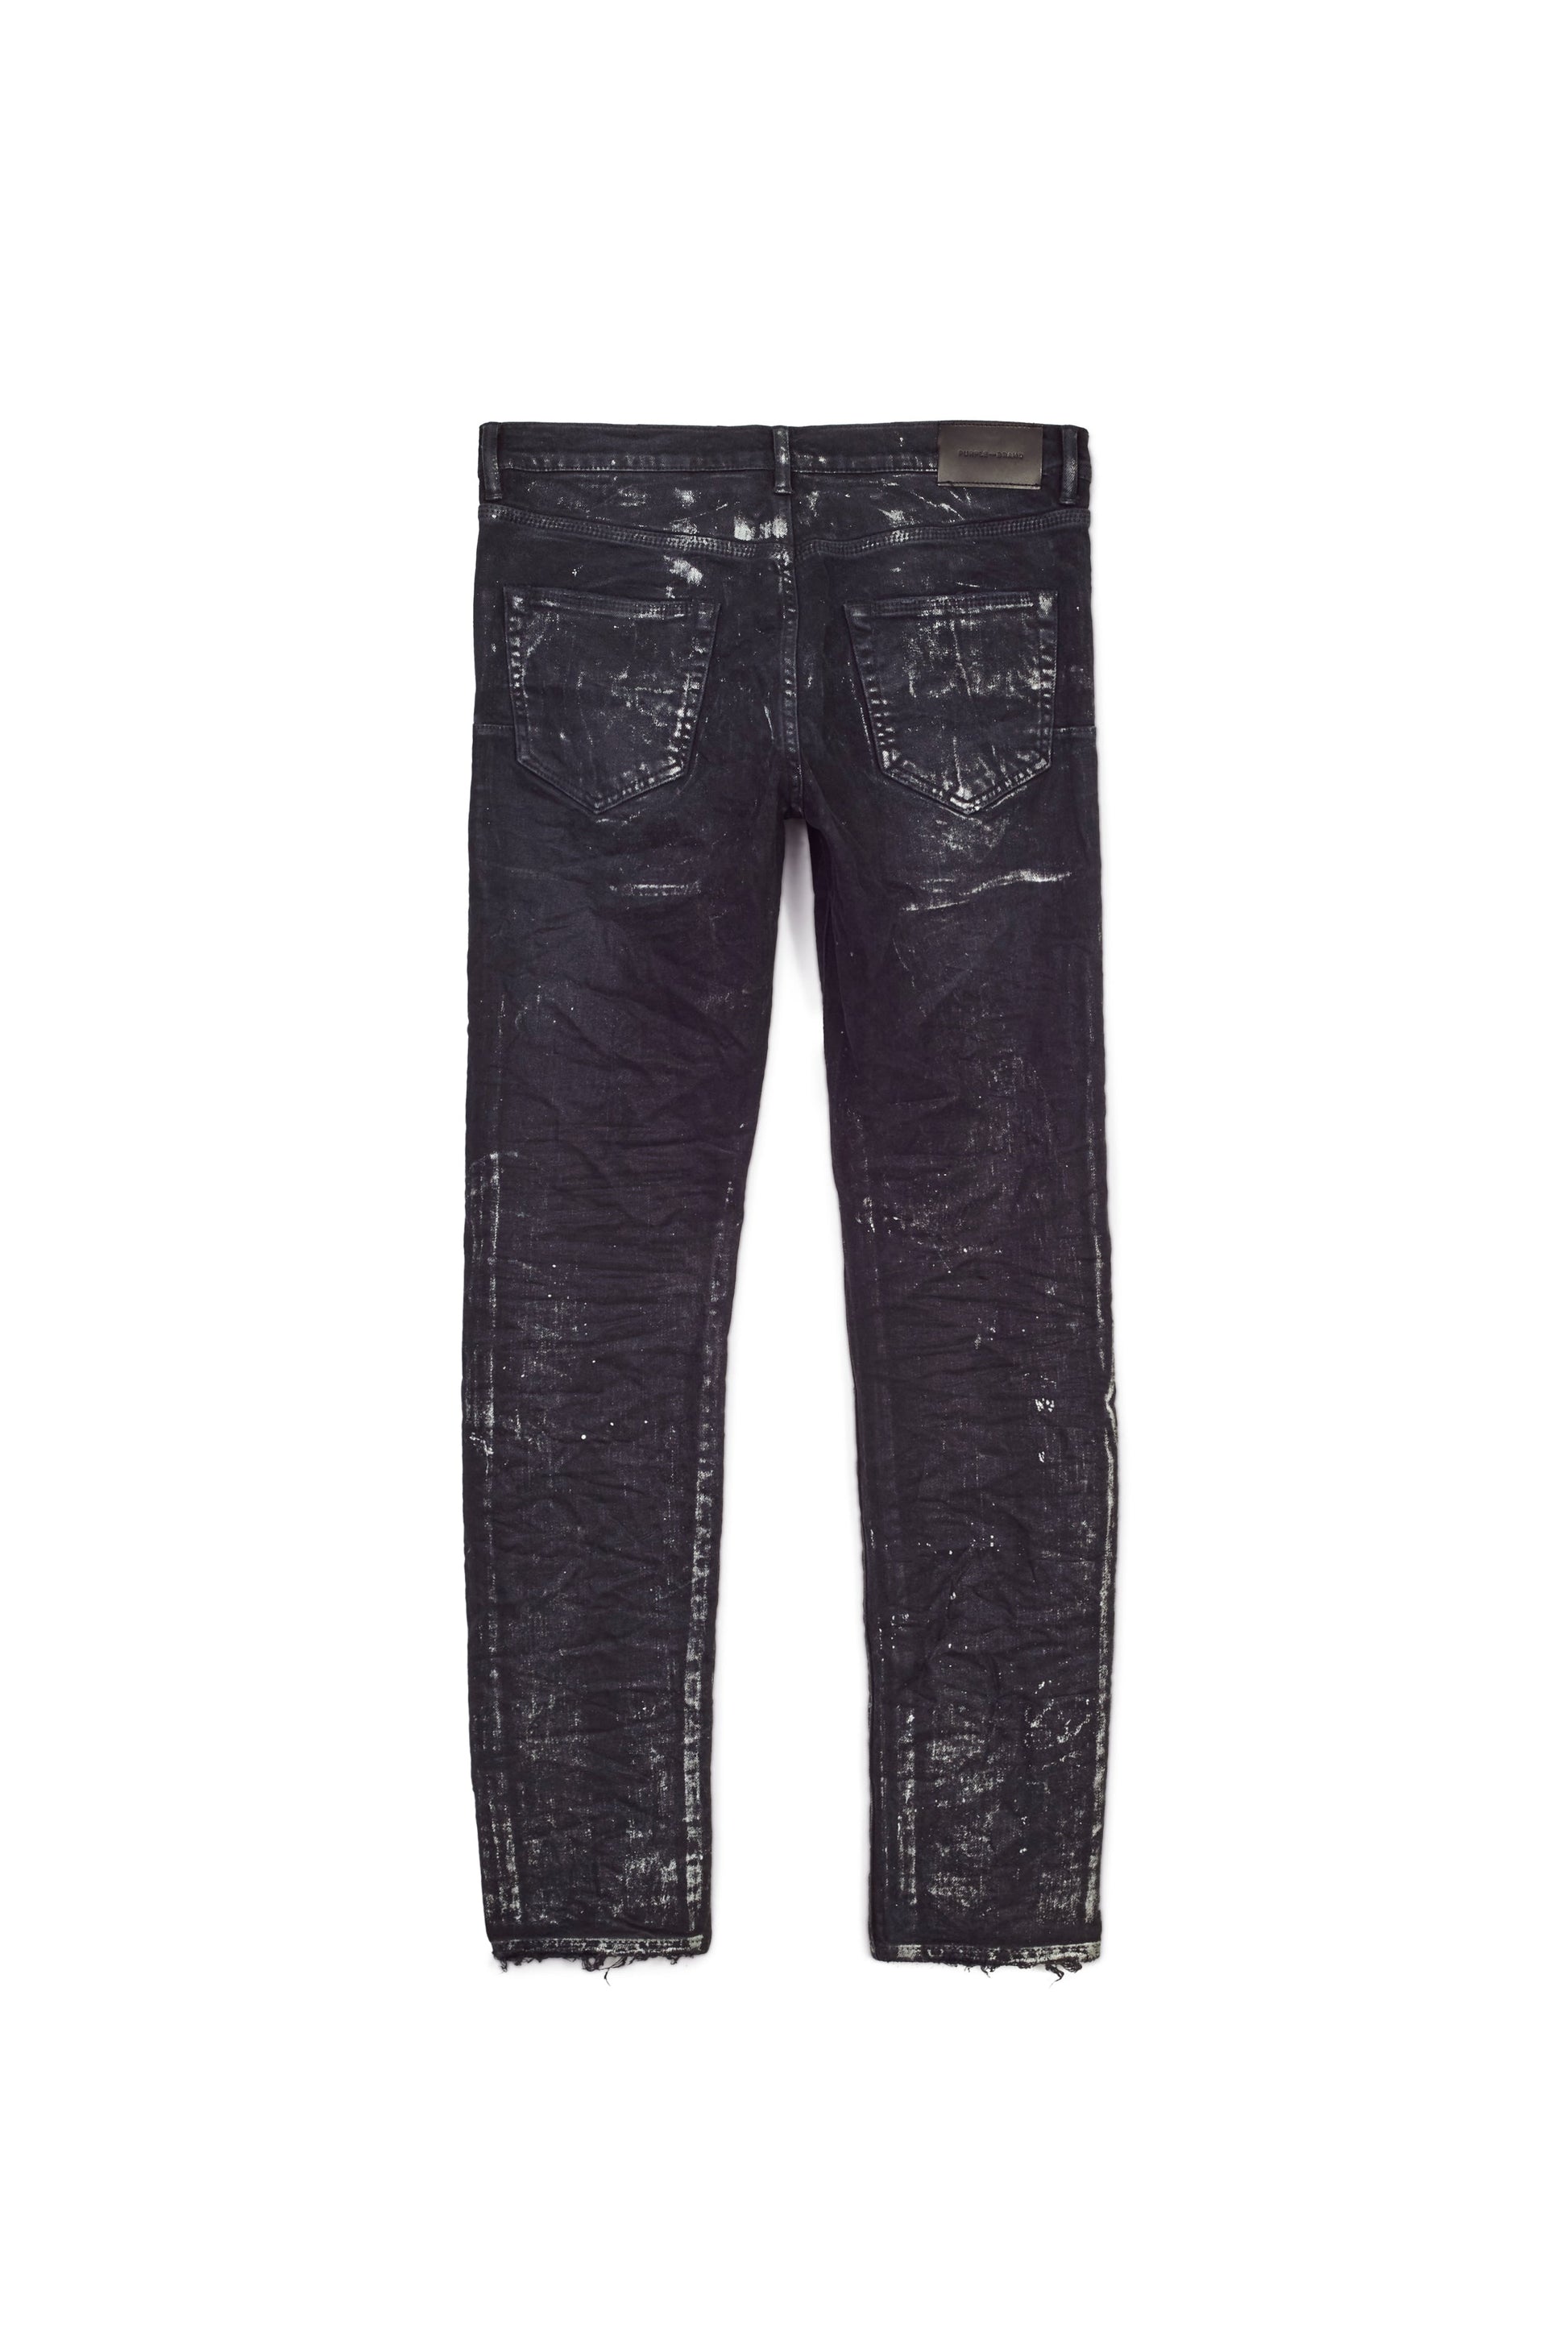 PURPLE BRAND - Men's Low Rise Skinny Jean - Style No. P001 - Black Wash Silver Oil Coated - Back